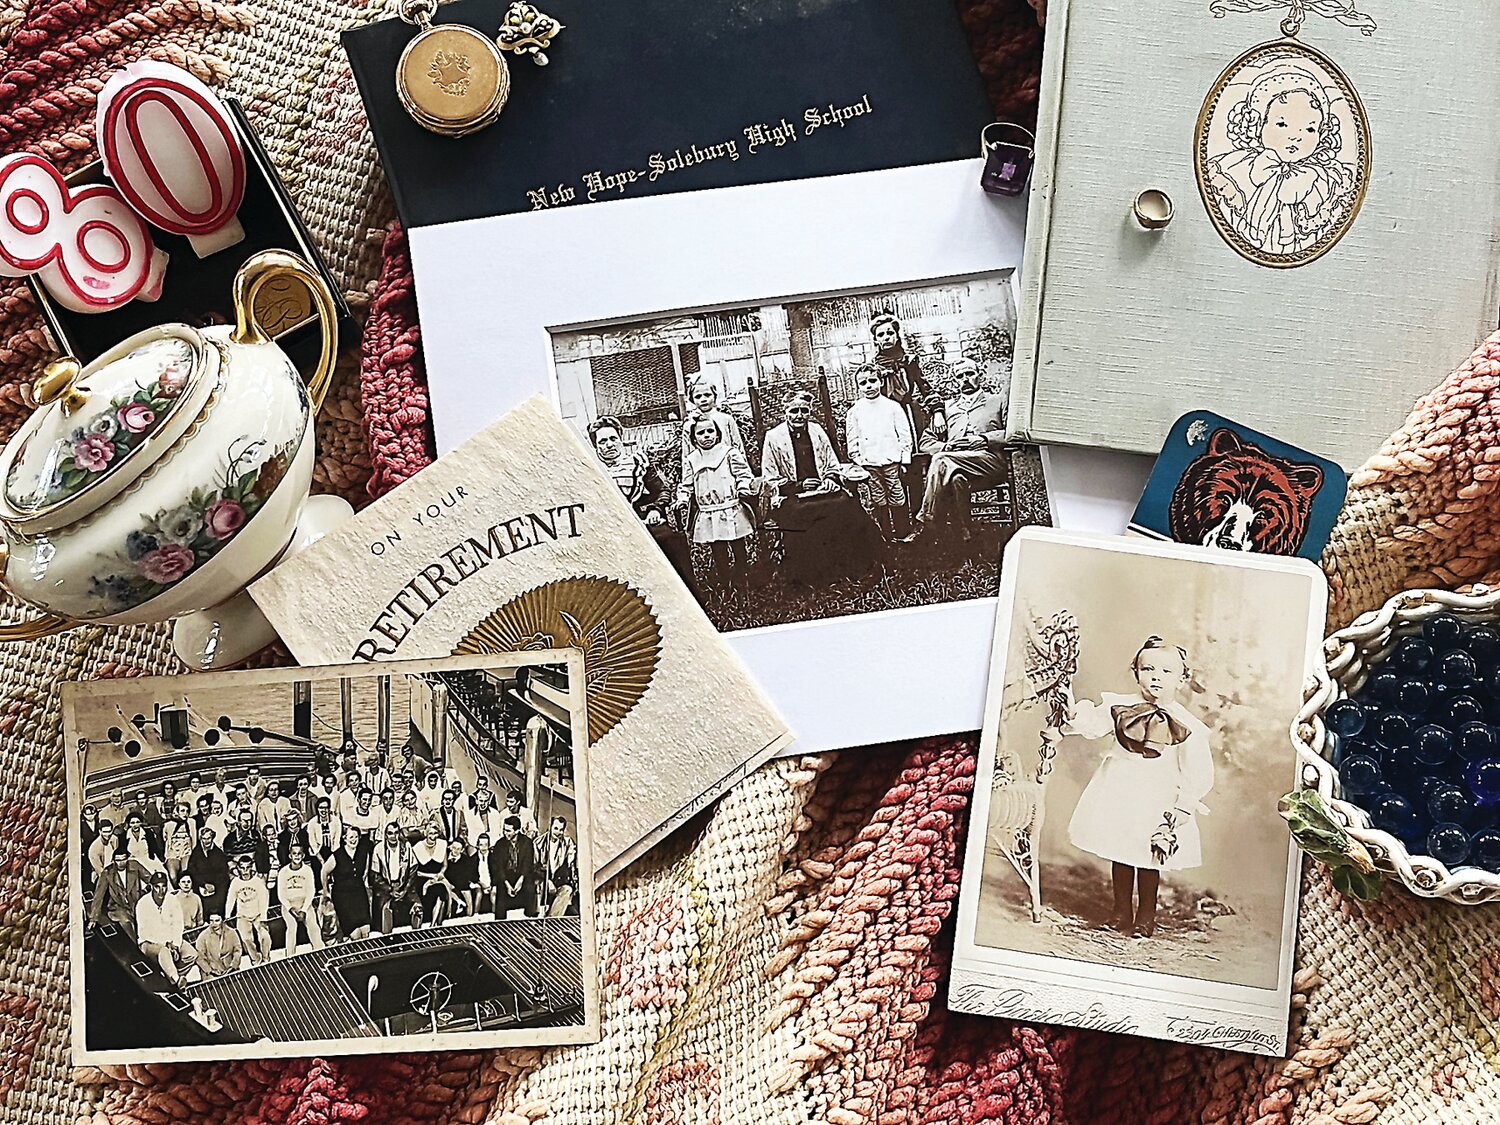 Solebury Township Historical Society hosts Family History 101: Introduction to Genealogy.